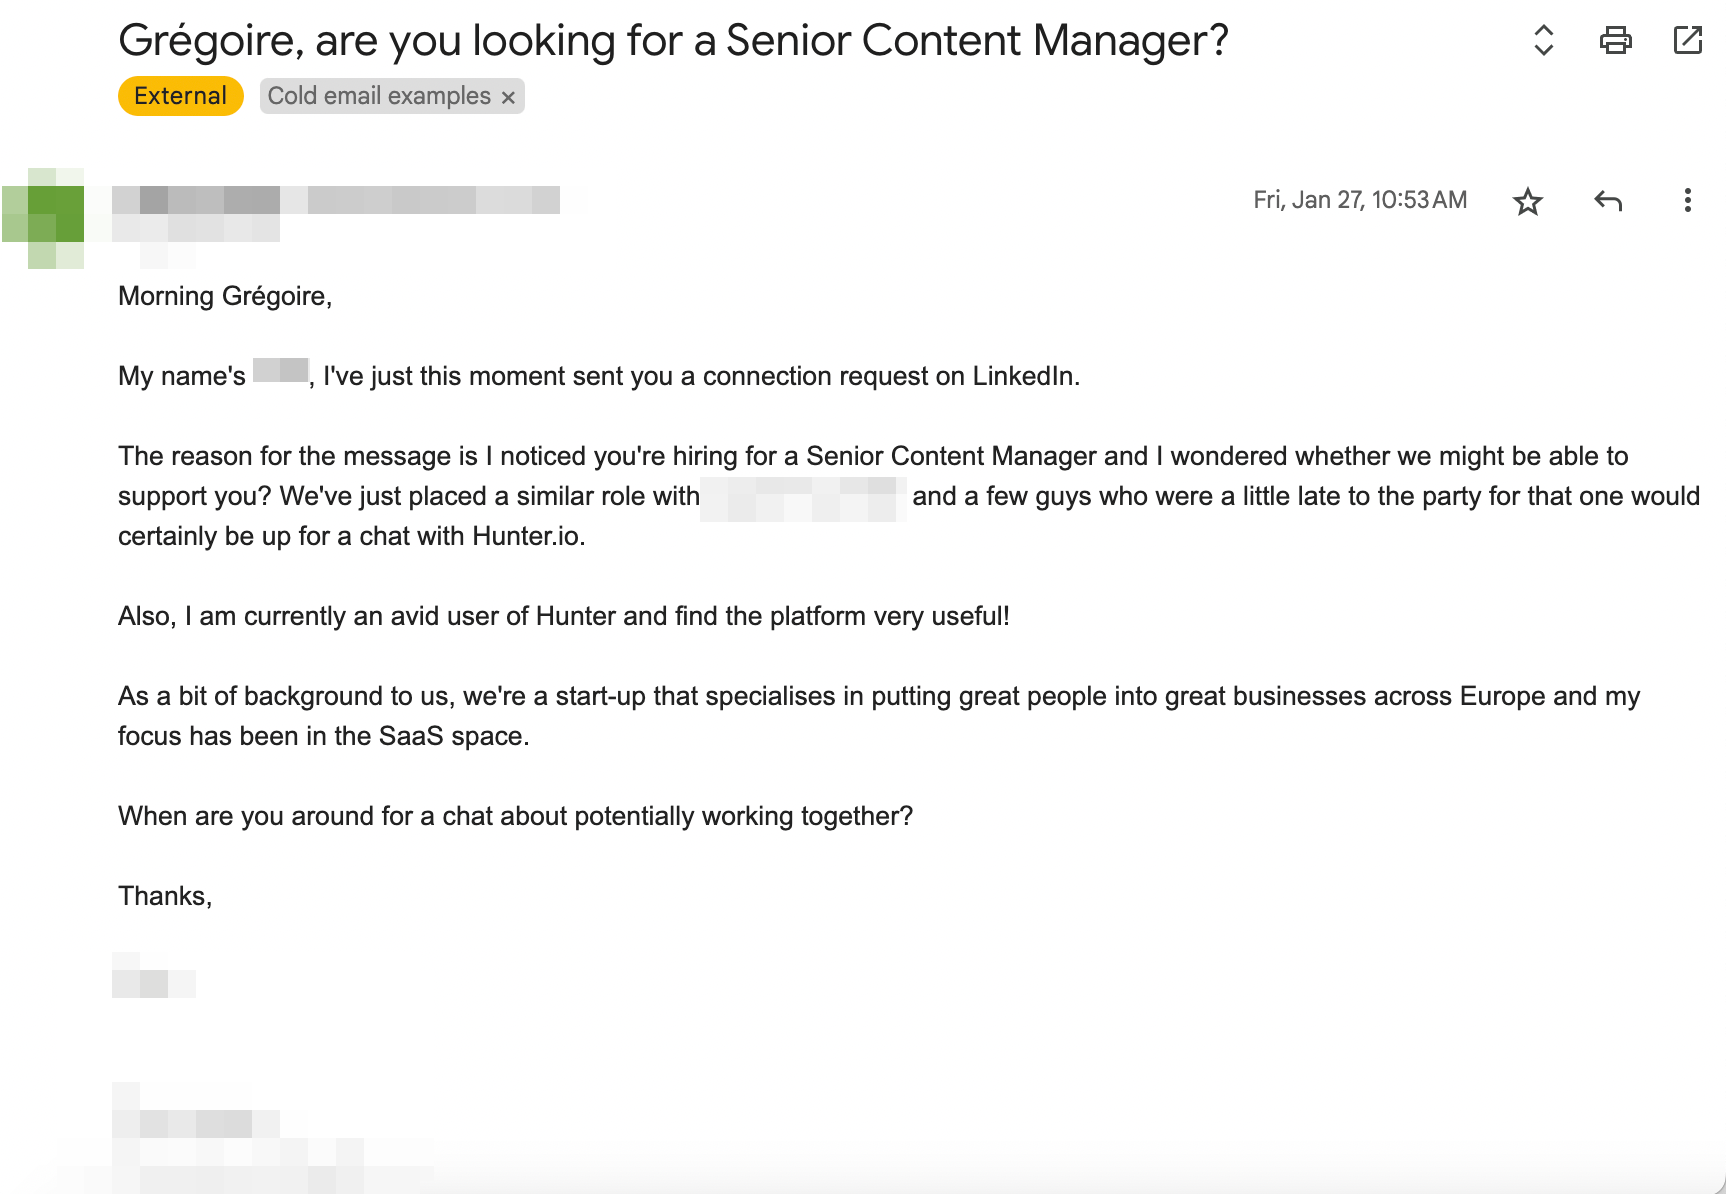 An example of a cold email that demonstrates relevance by employing deep personalization based on the job offers posted by the recipient's company